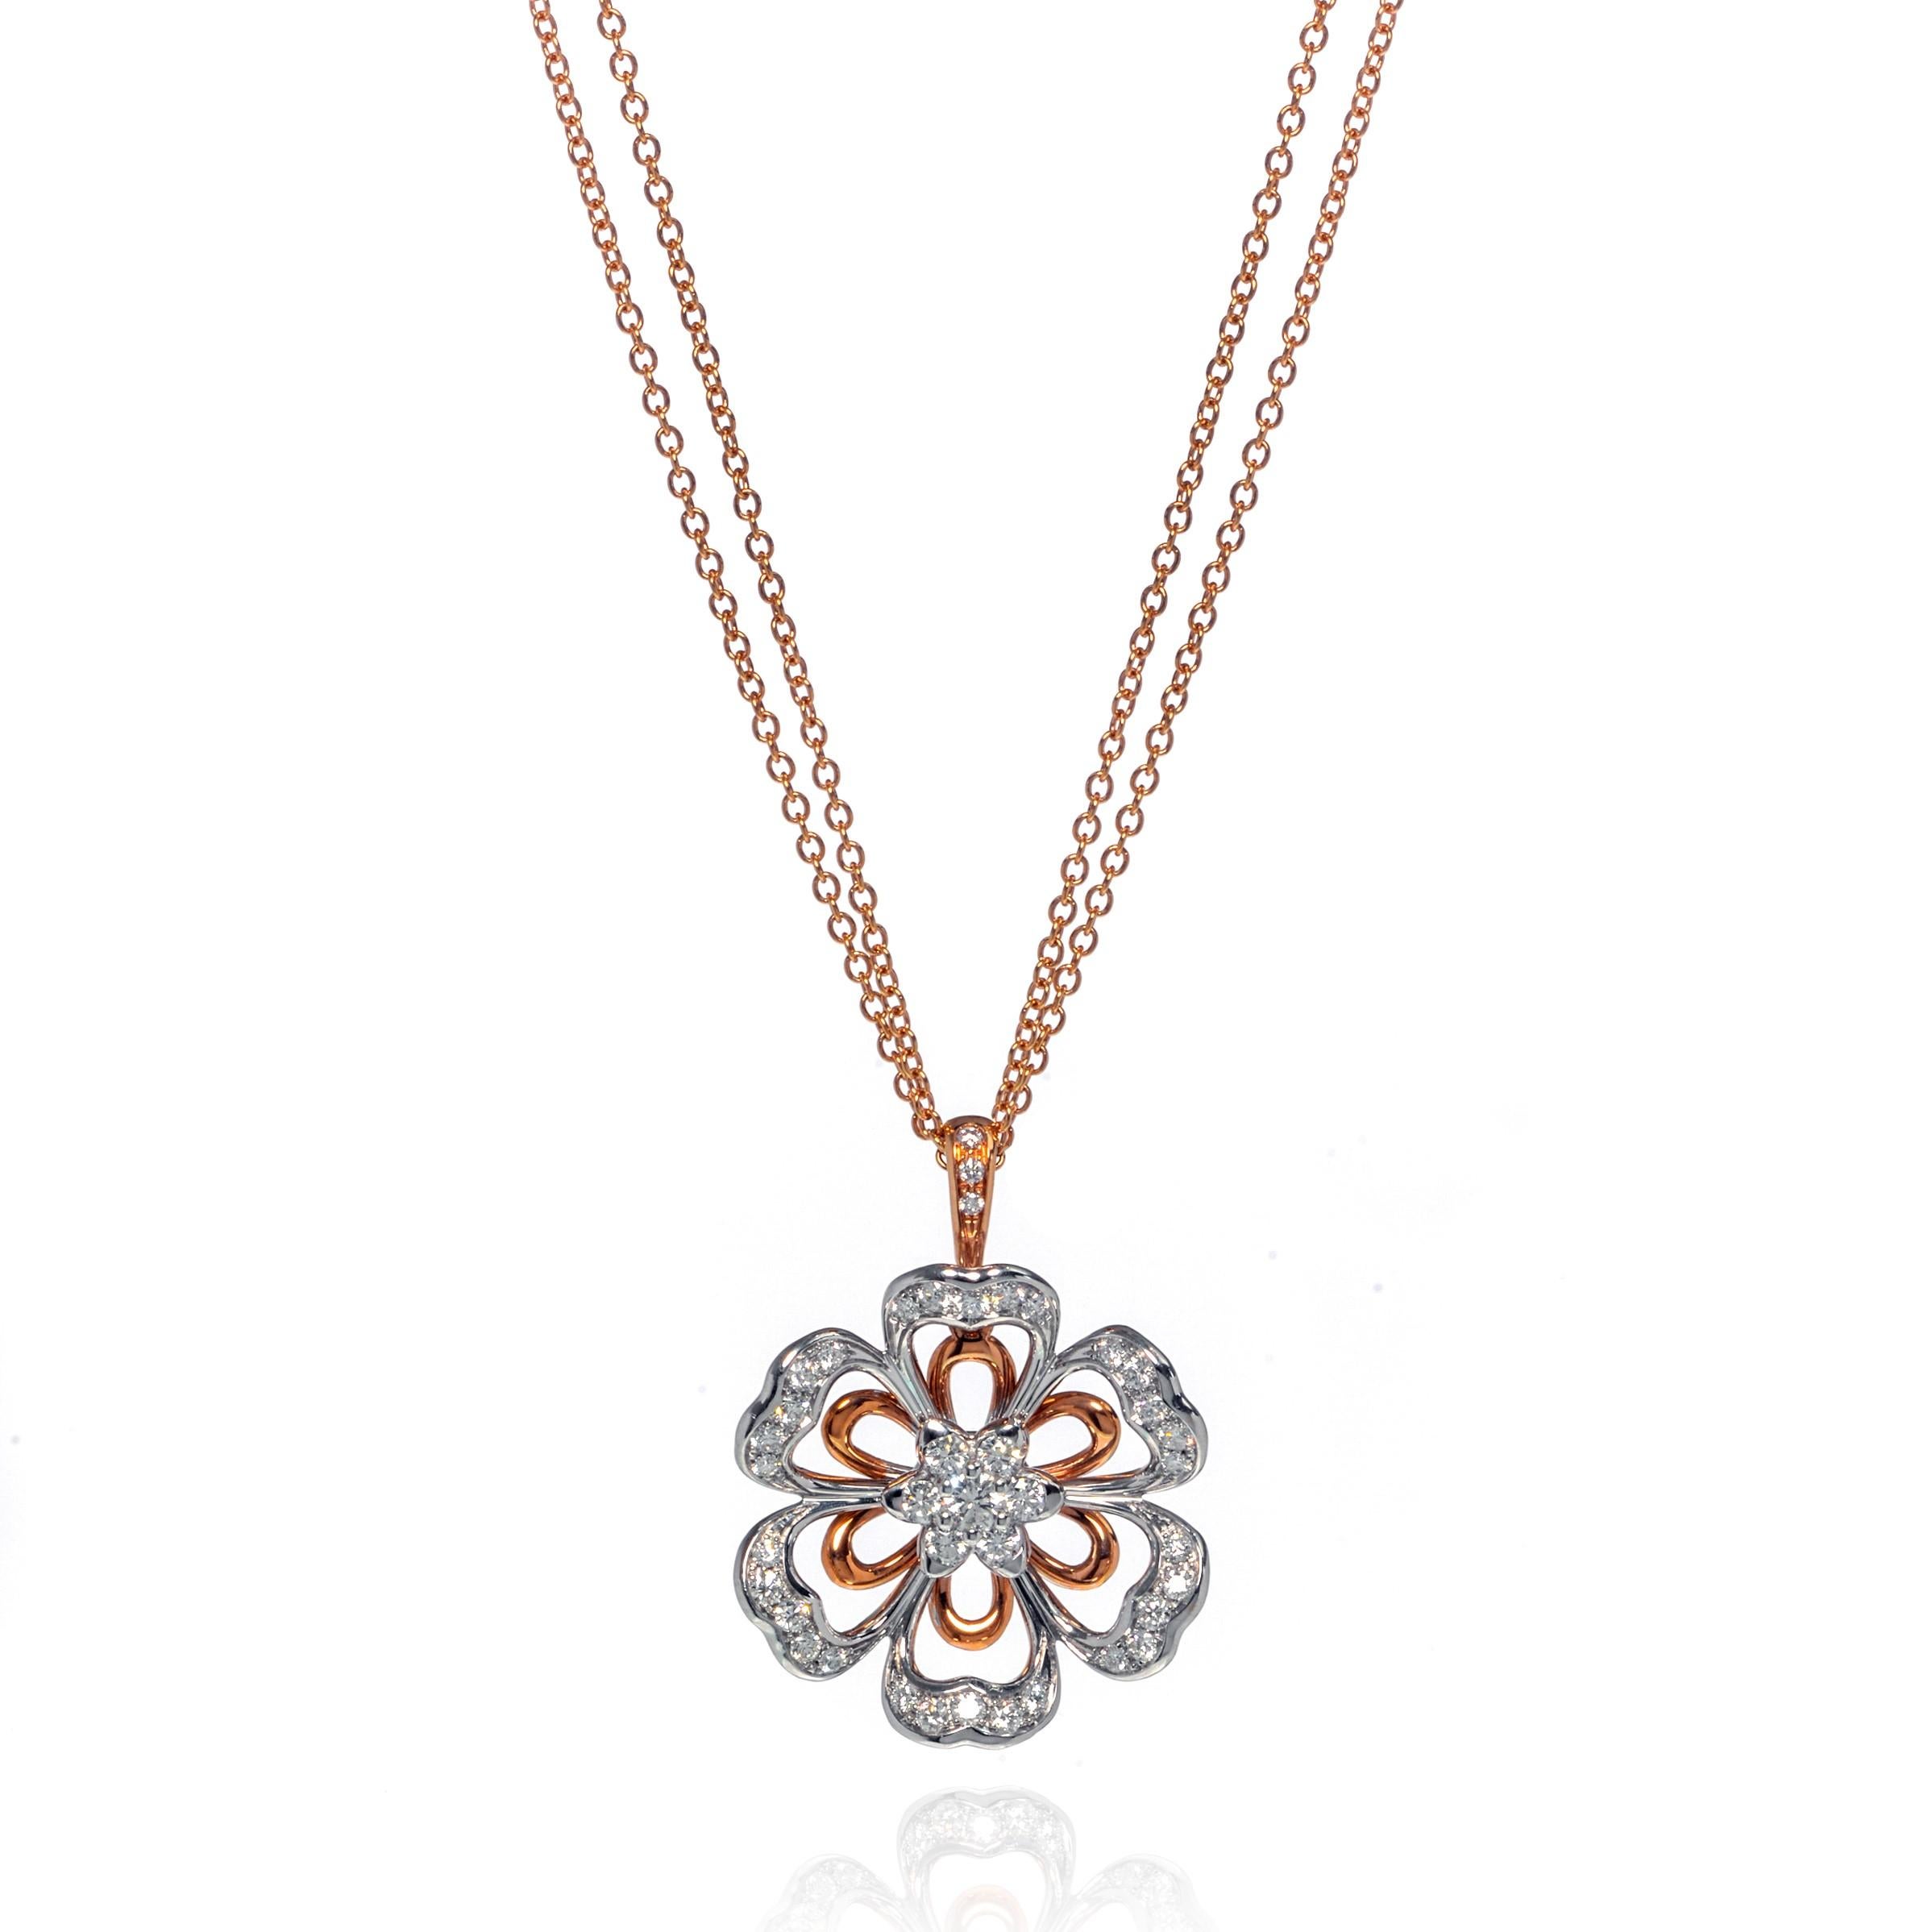 This beautiful Luca Carati 18k rose and white gold pendant necklace features a gorgeous display of diamonds 1.11cttw with a flower shaped design. An 18k white gold floral setting overlaid on an airy rose gold floral setting with a beautiful 18k rose